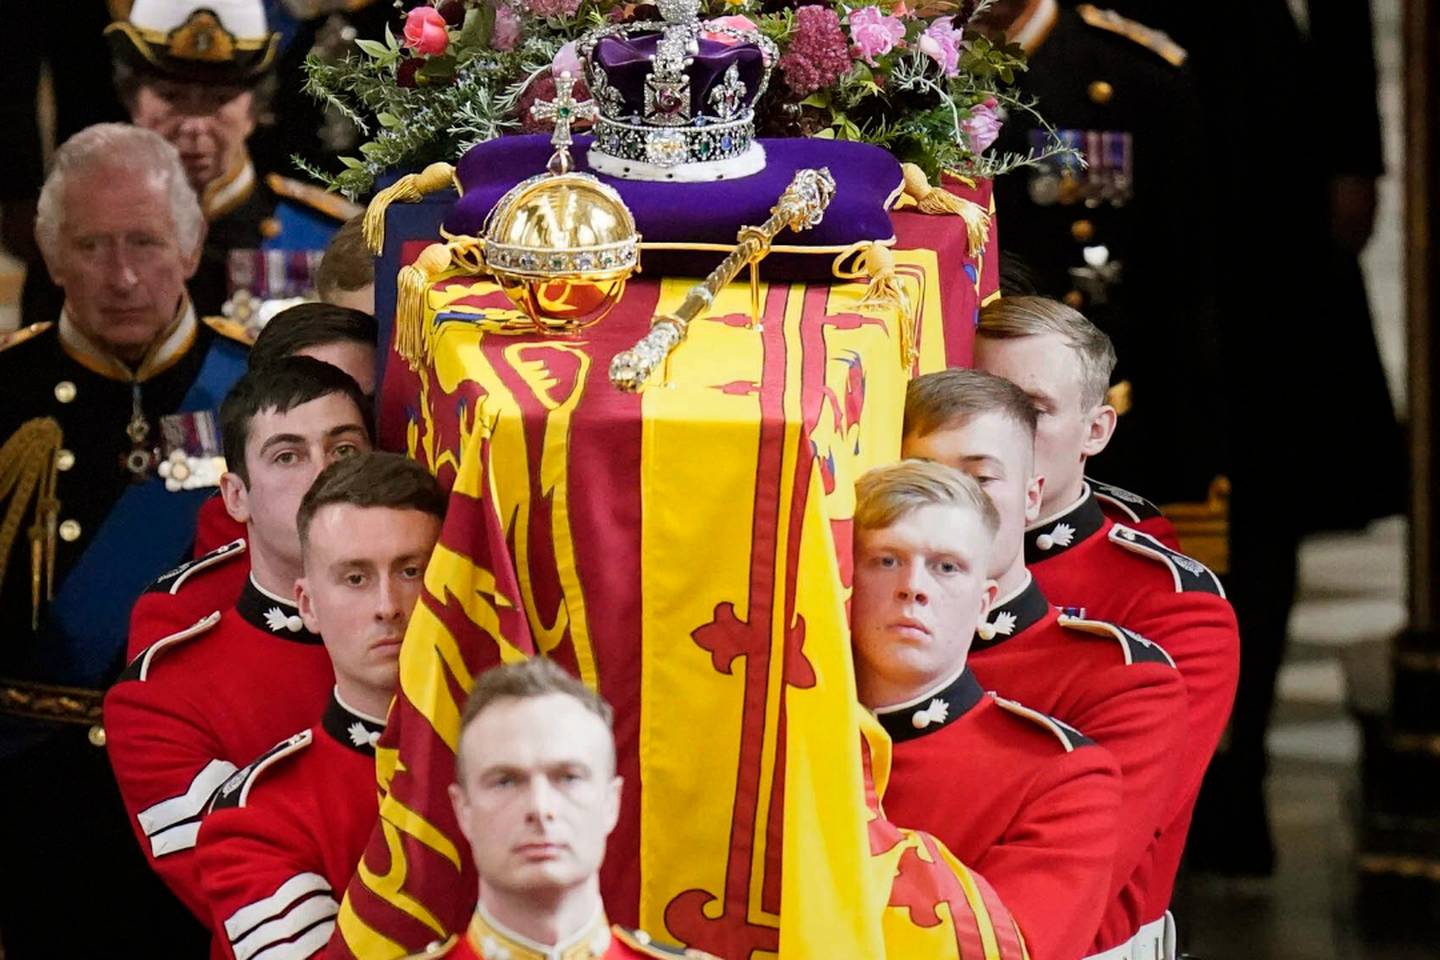 Card on top of Queen Elizabeth's coffin shows message from King Charles